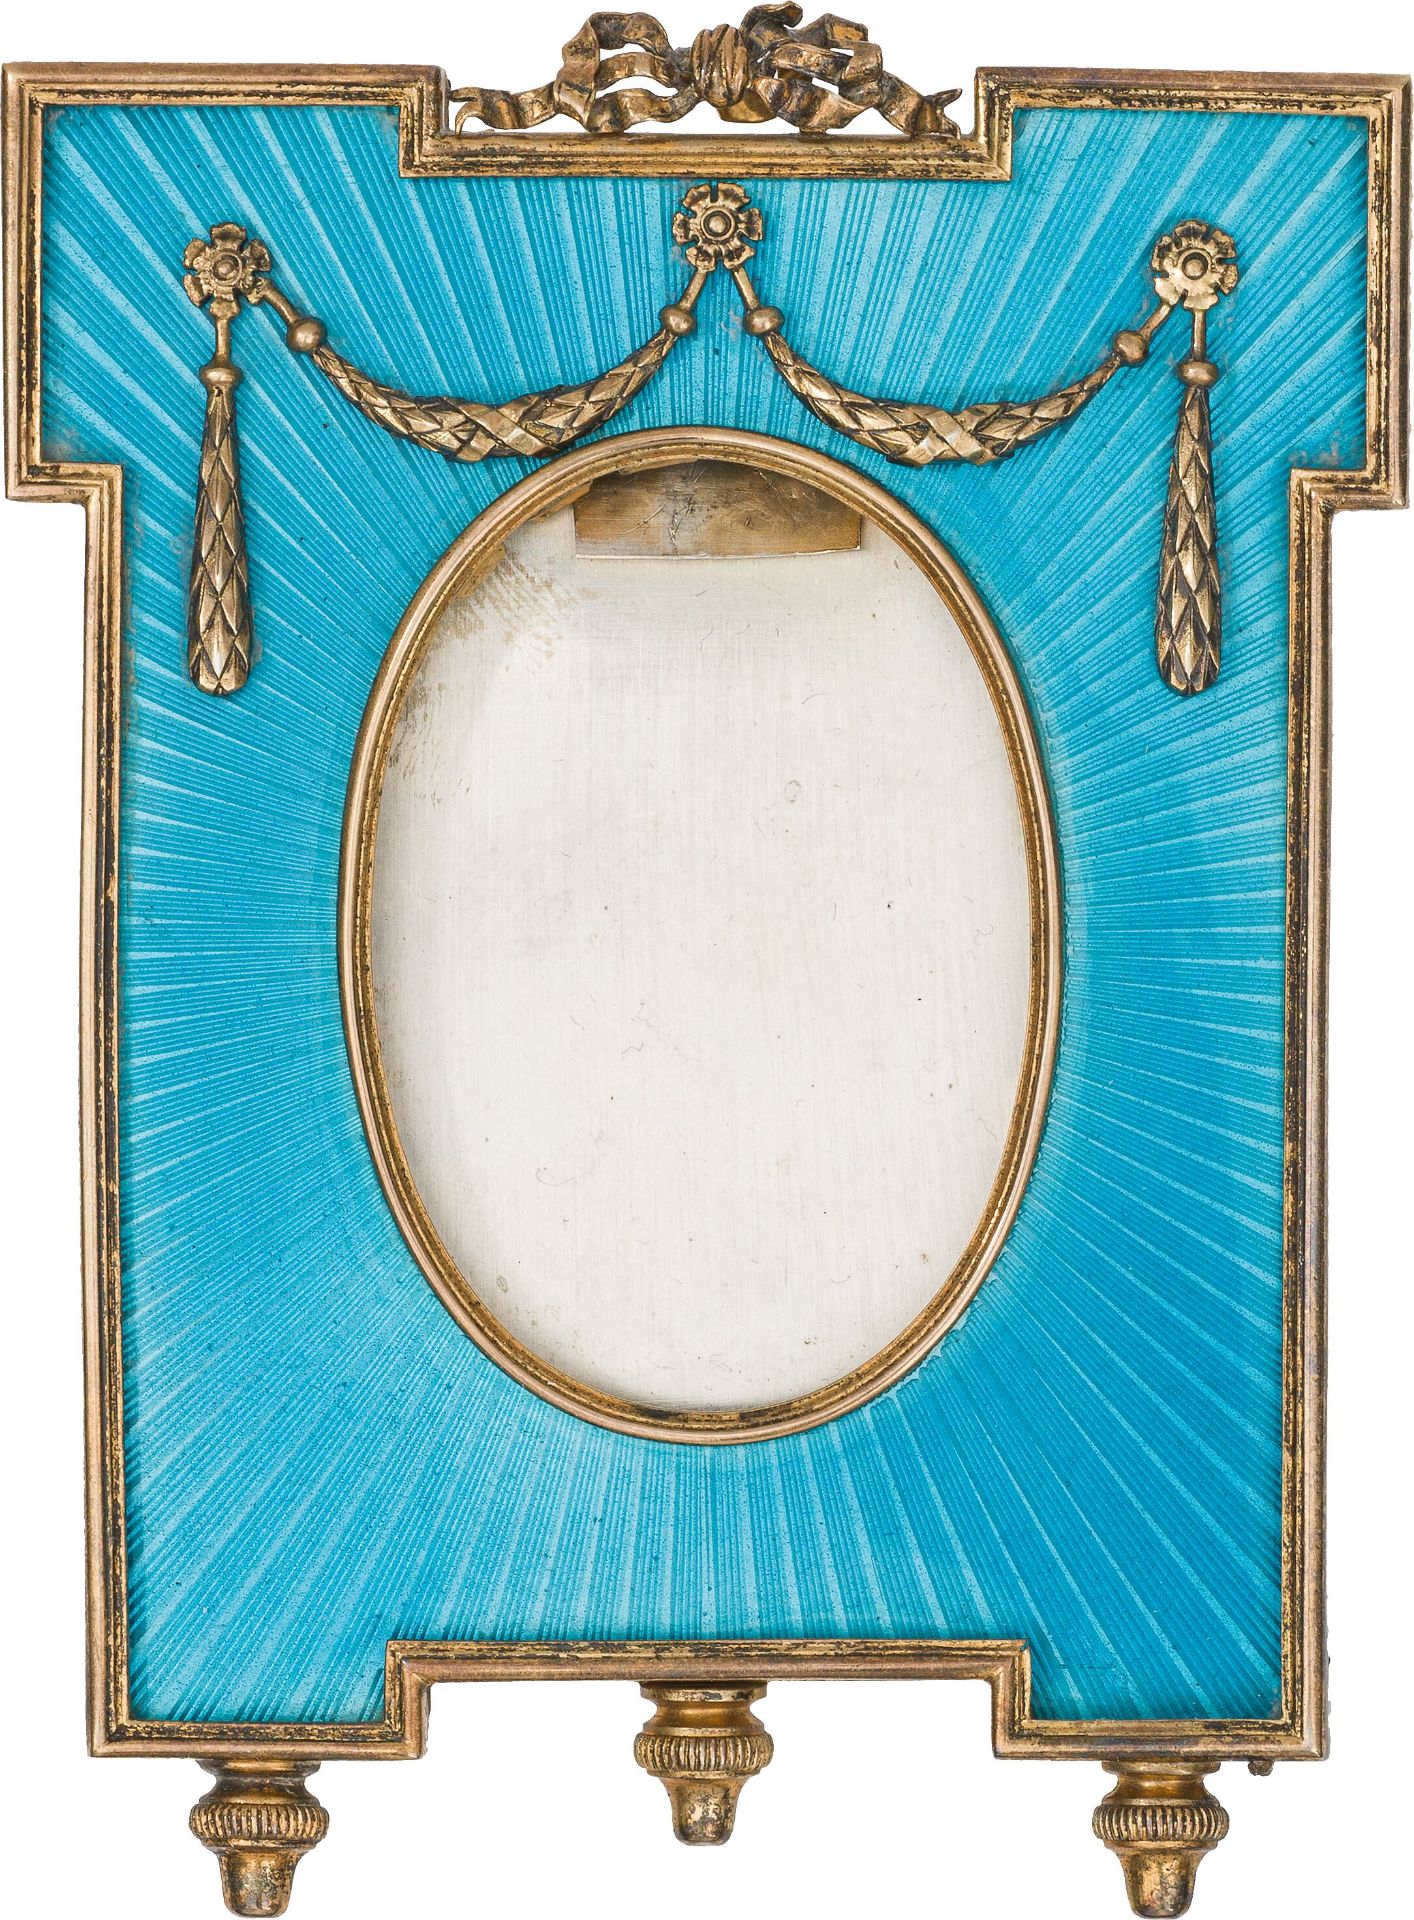 FabergéFrameSt. Petersburg, late 19th centurysilver, gilded; enamel; marked on the bottom and - Image 3 of 3